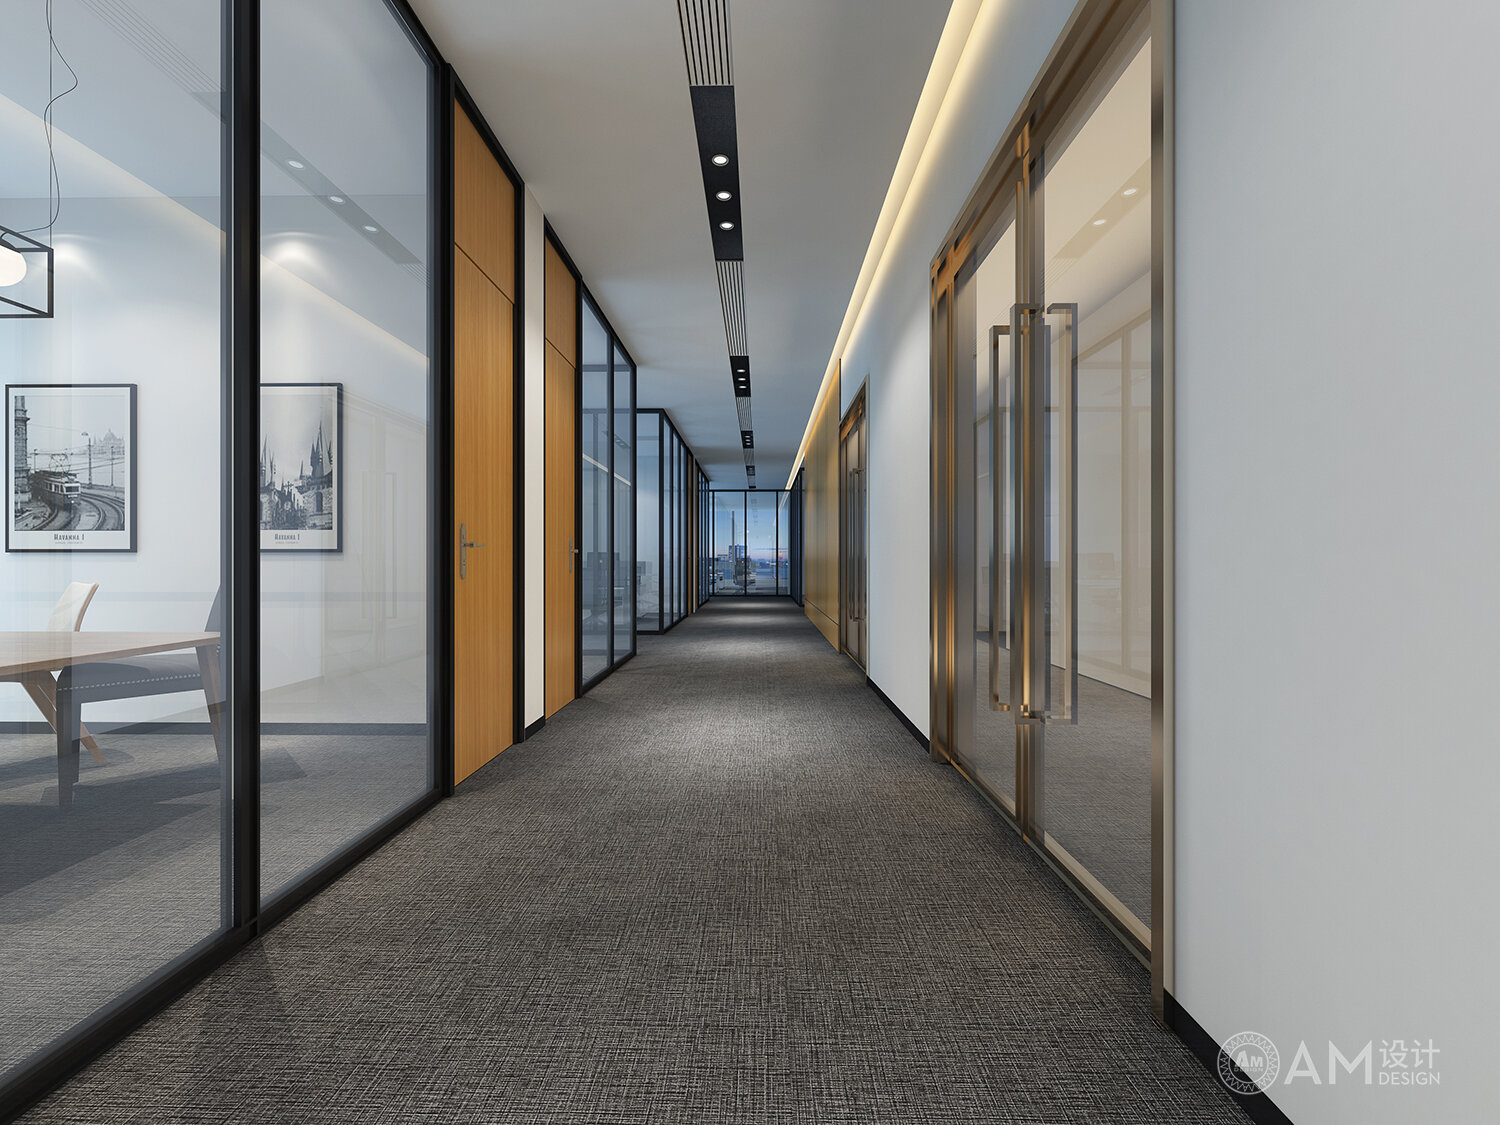 AM | Corridor design of office building of King Group Headquarters